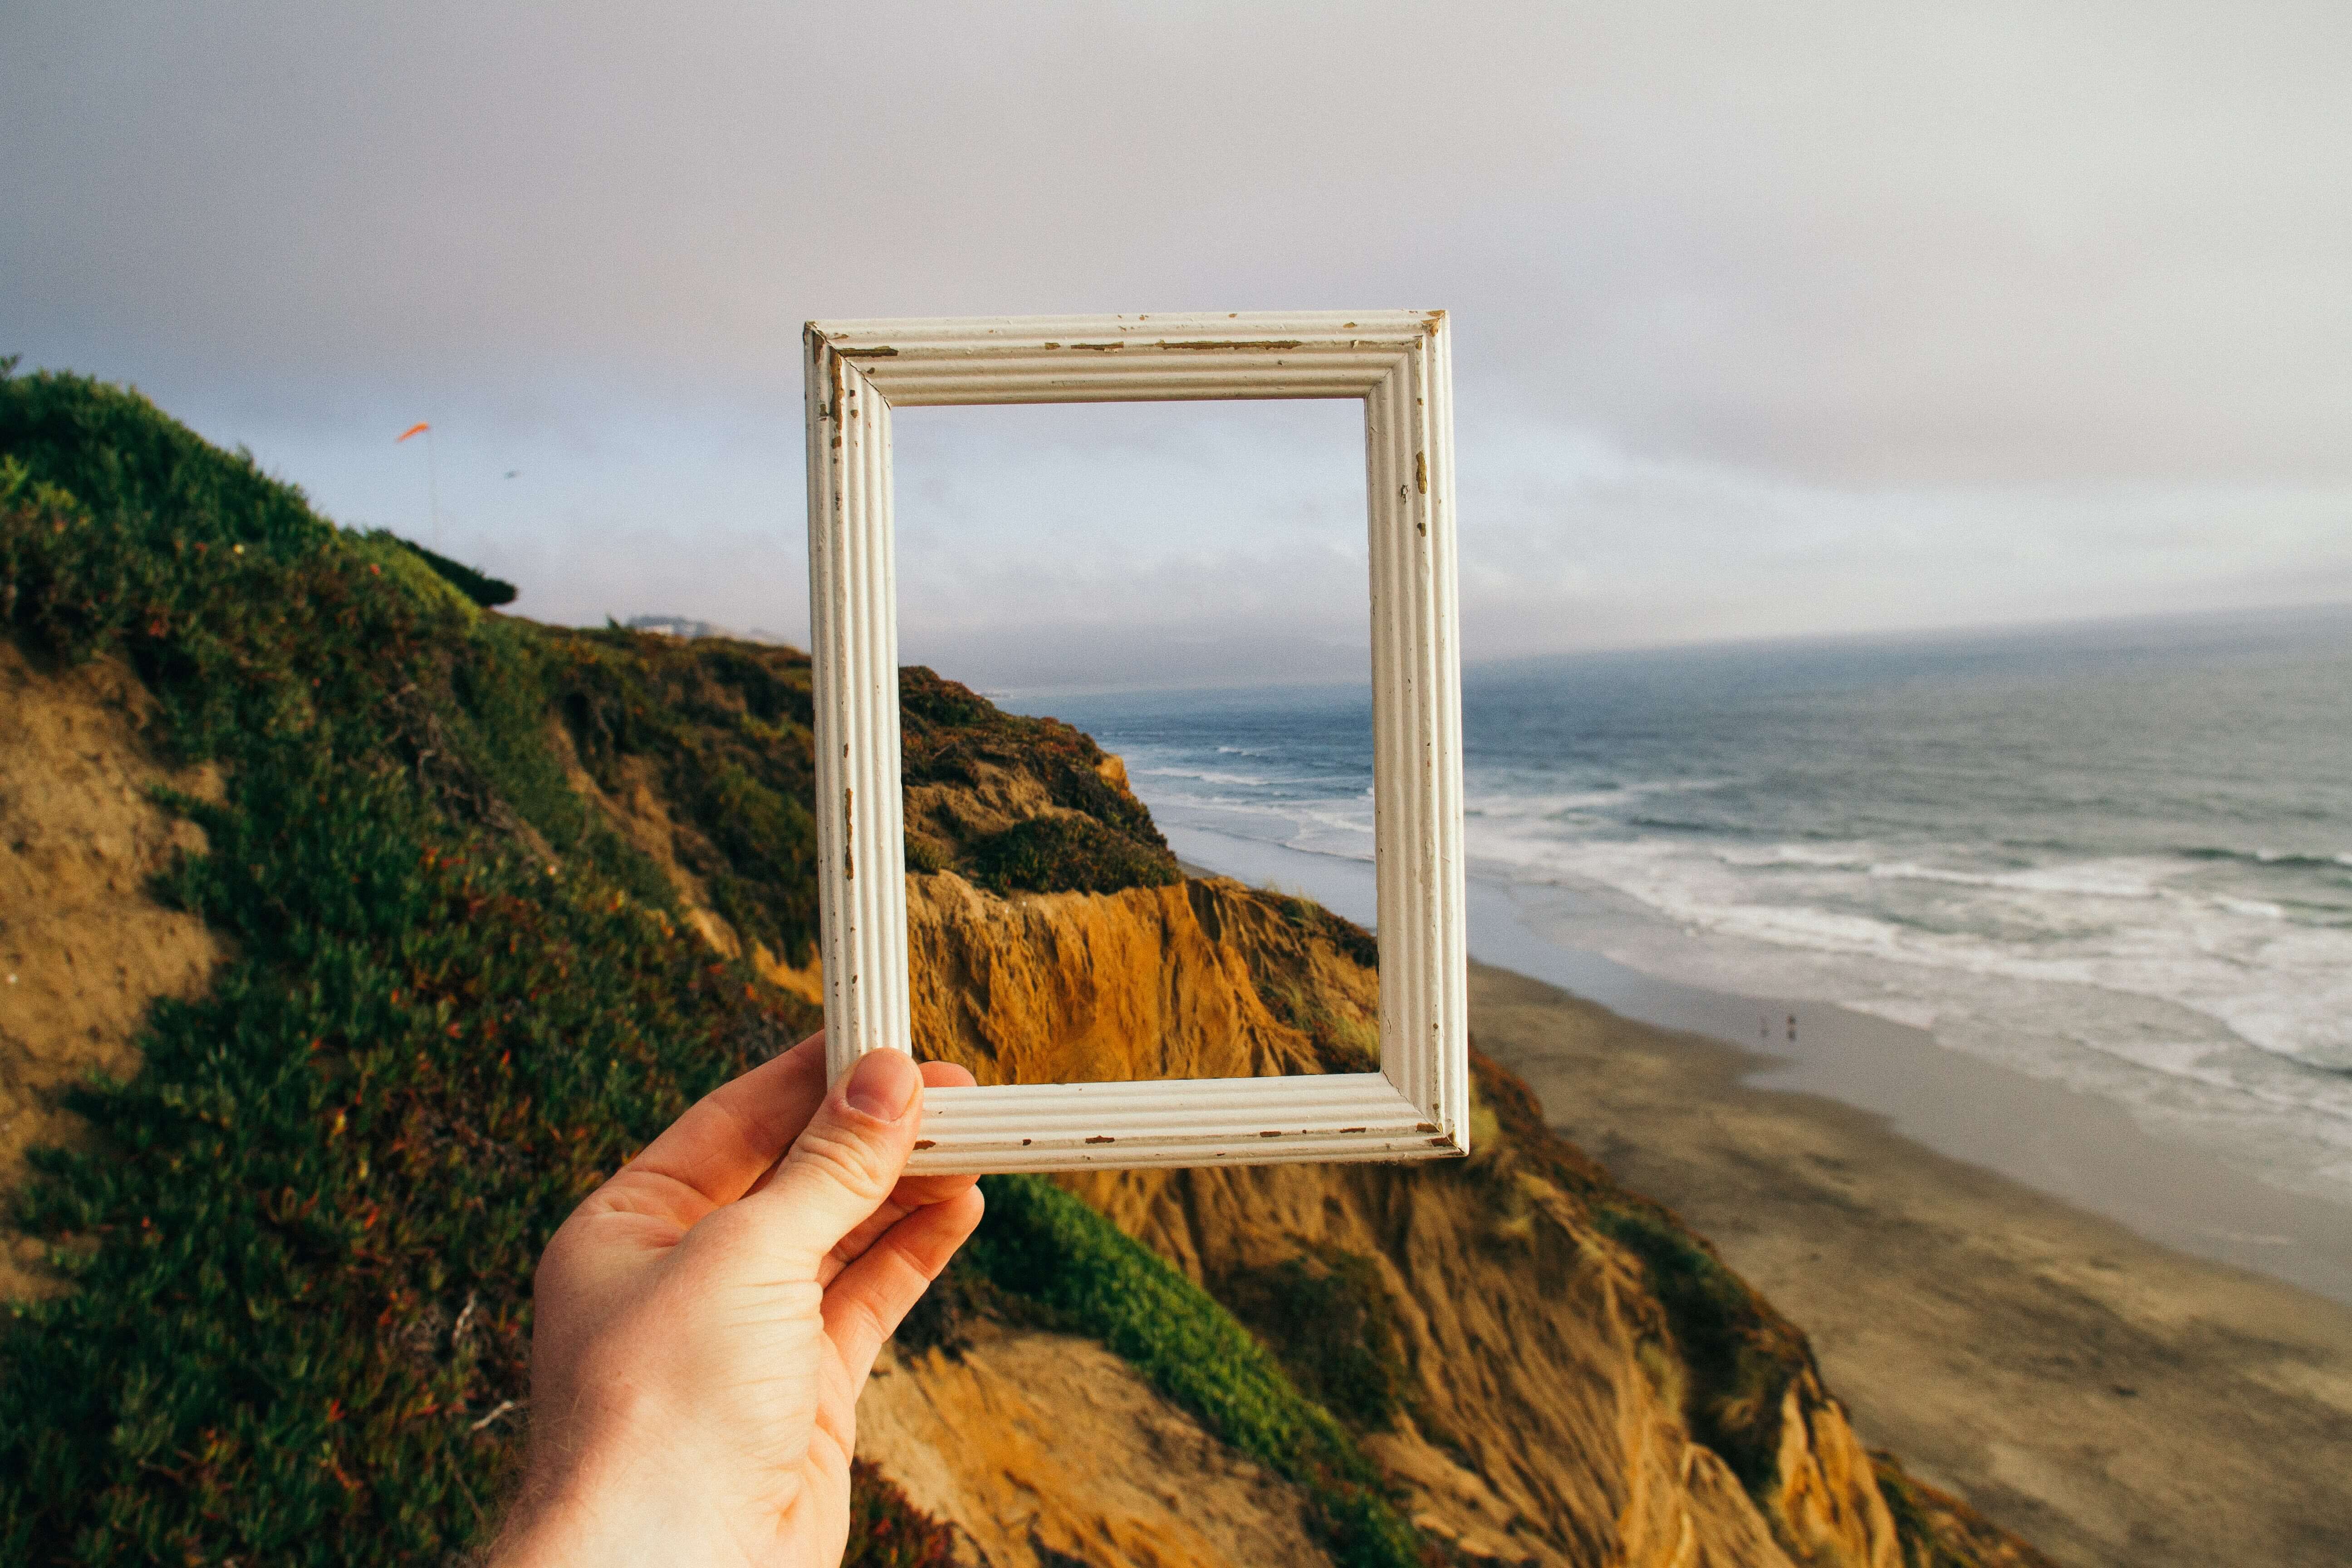  A hand holding up a wooden picture frame around a beachside landscape